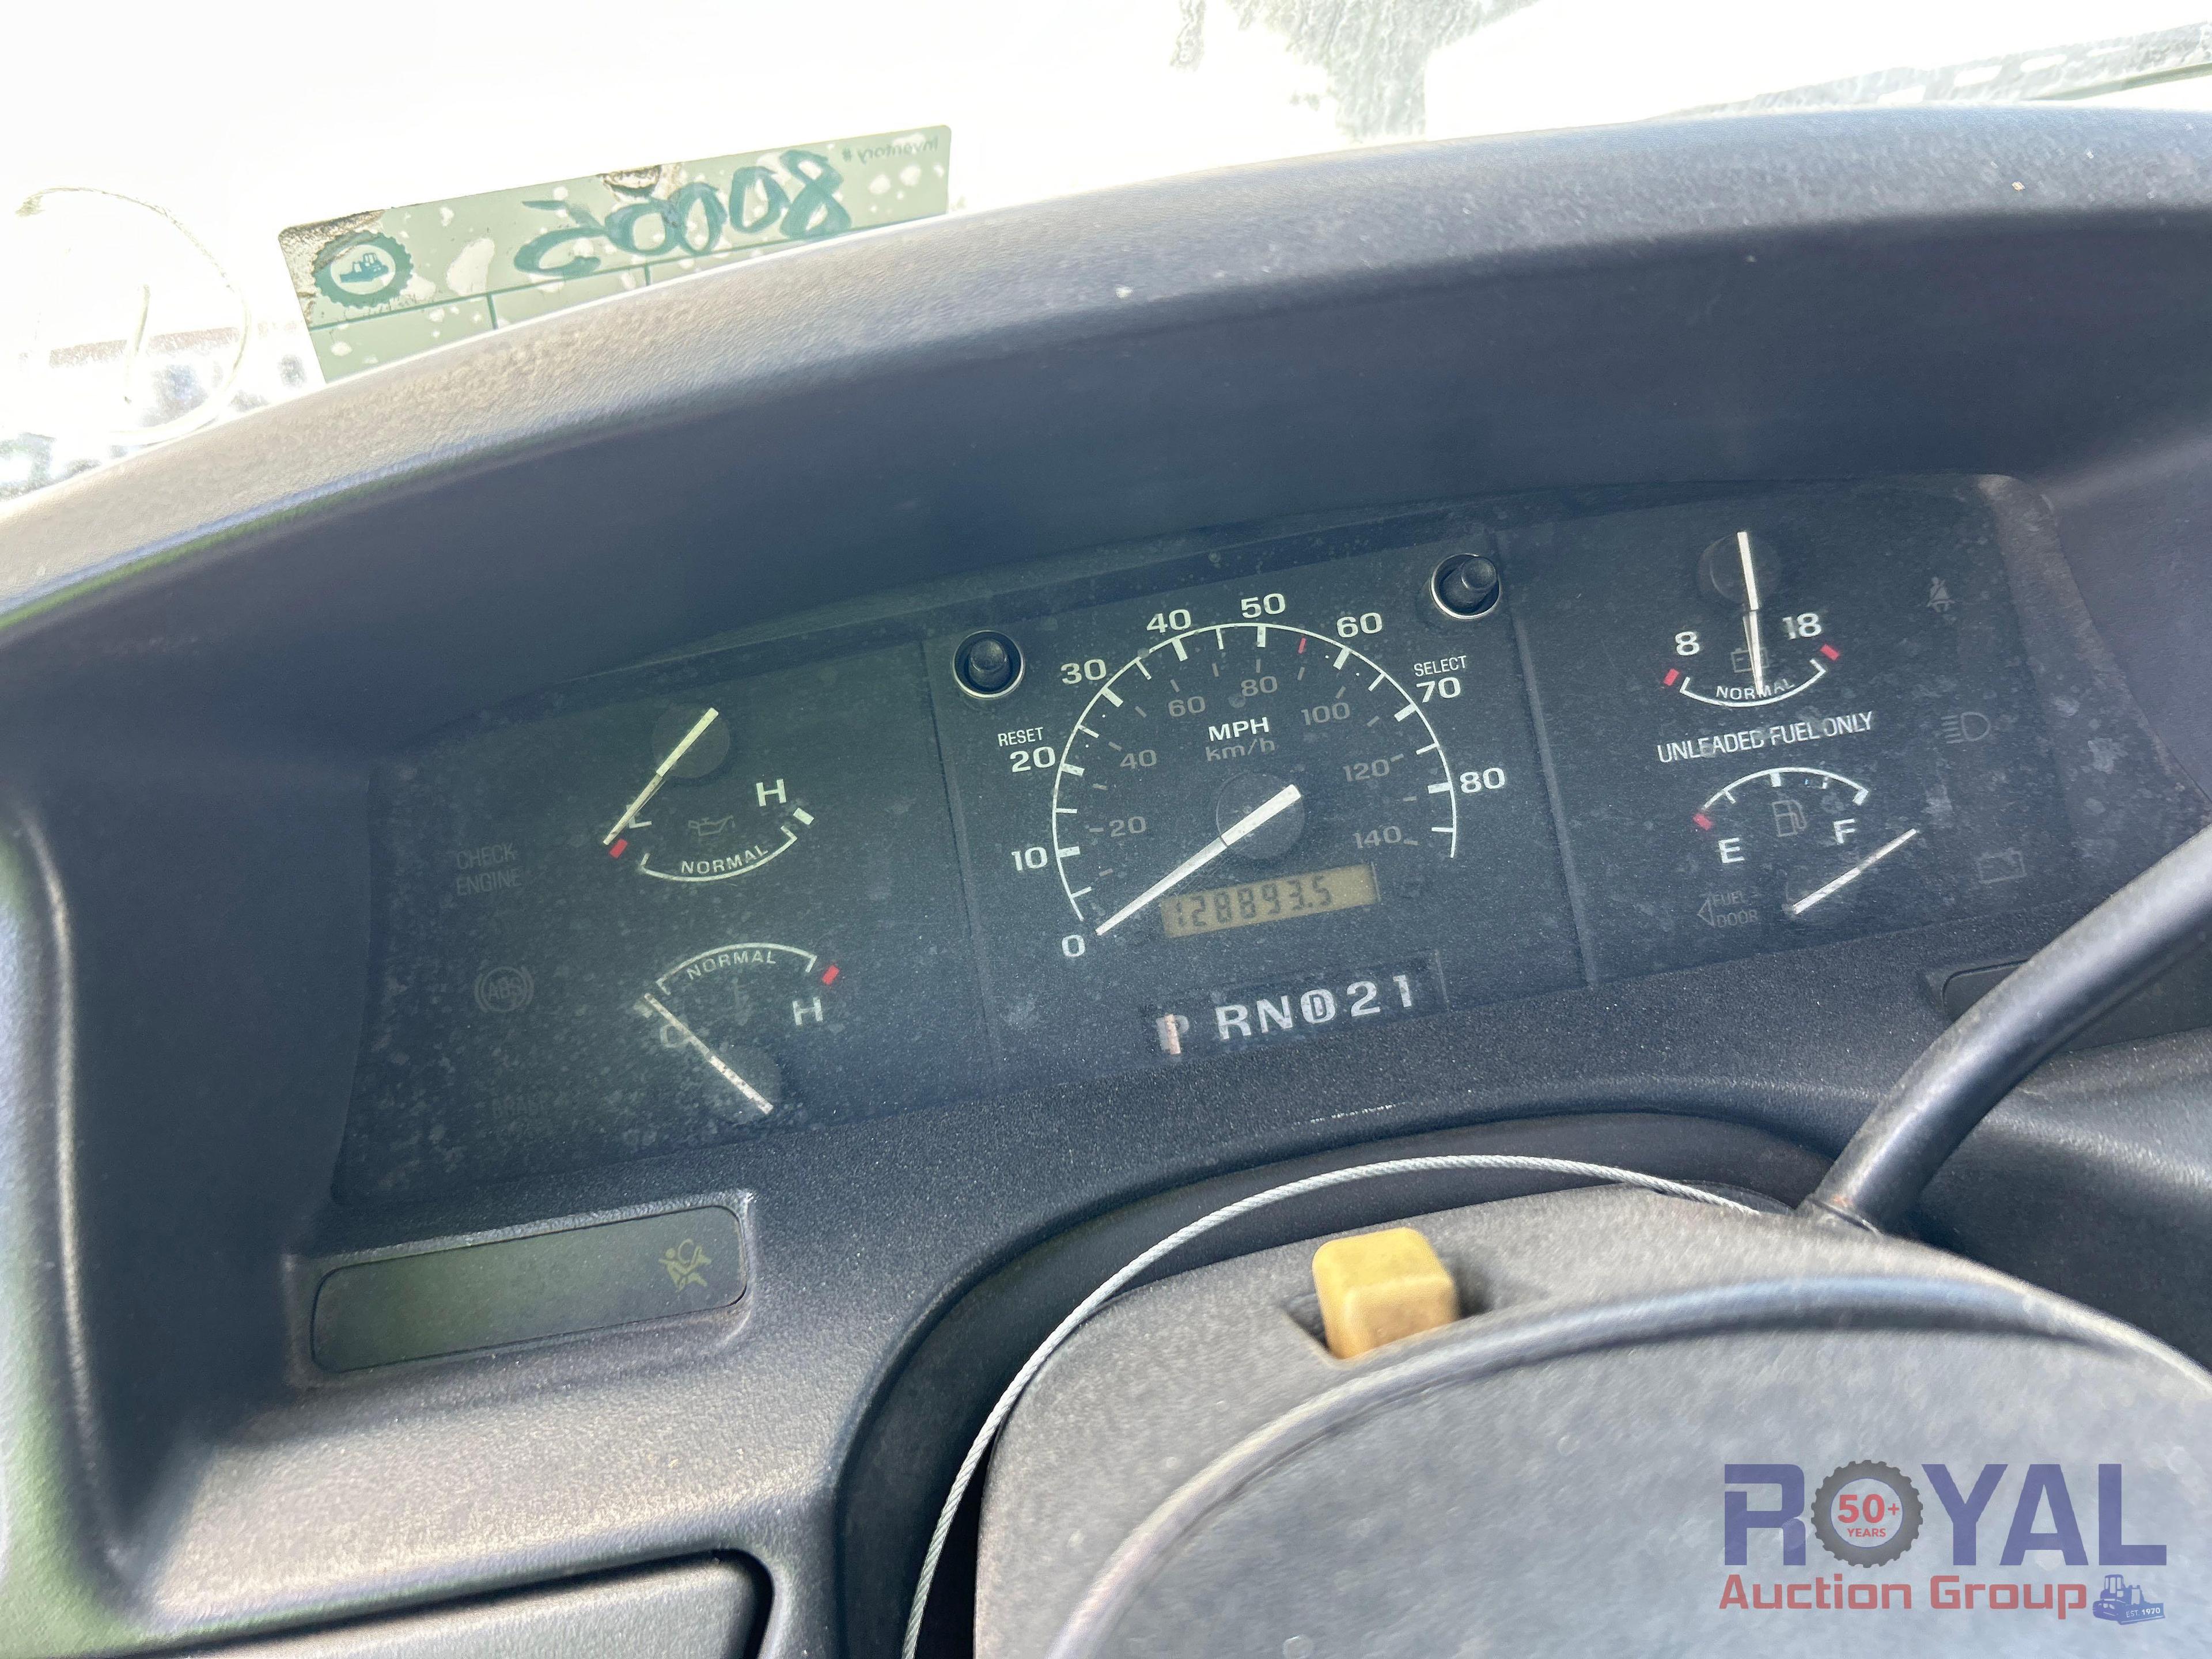 1995 Ford F350 Service Truck